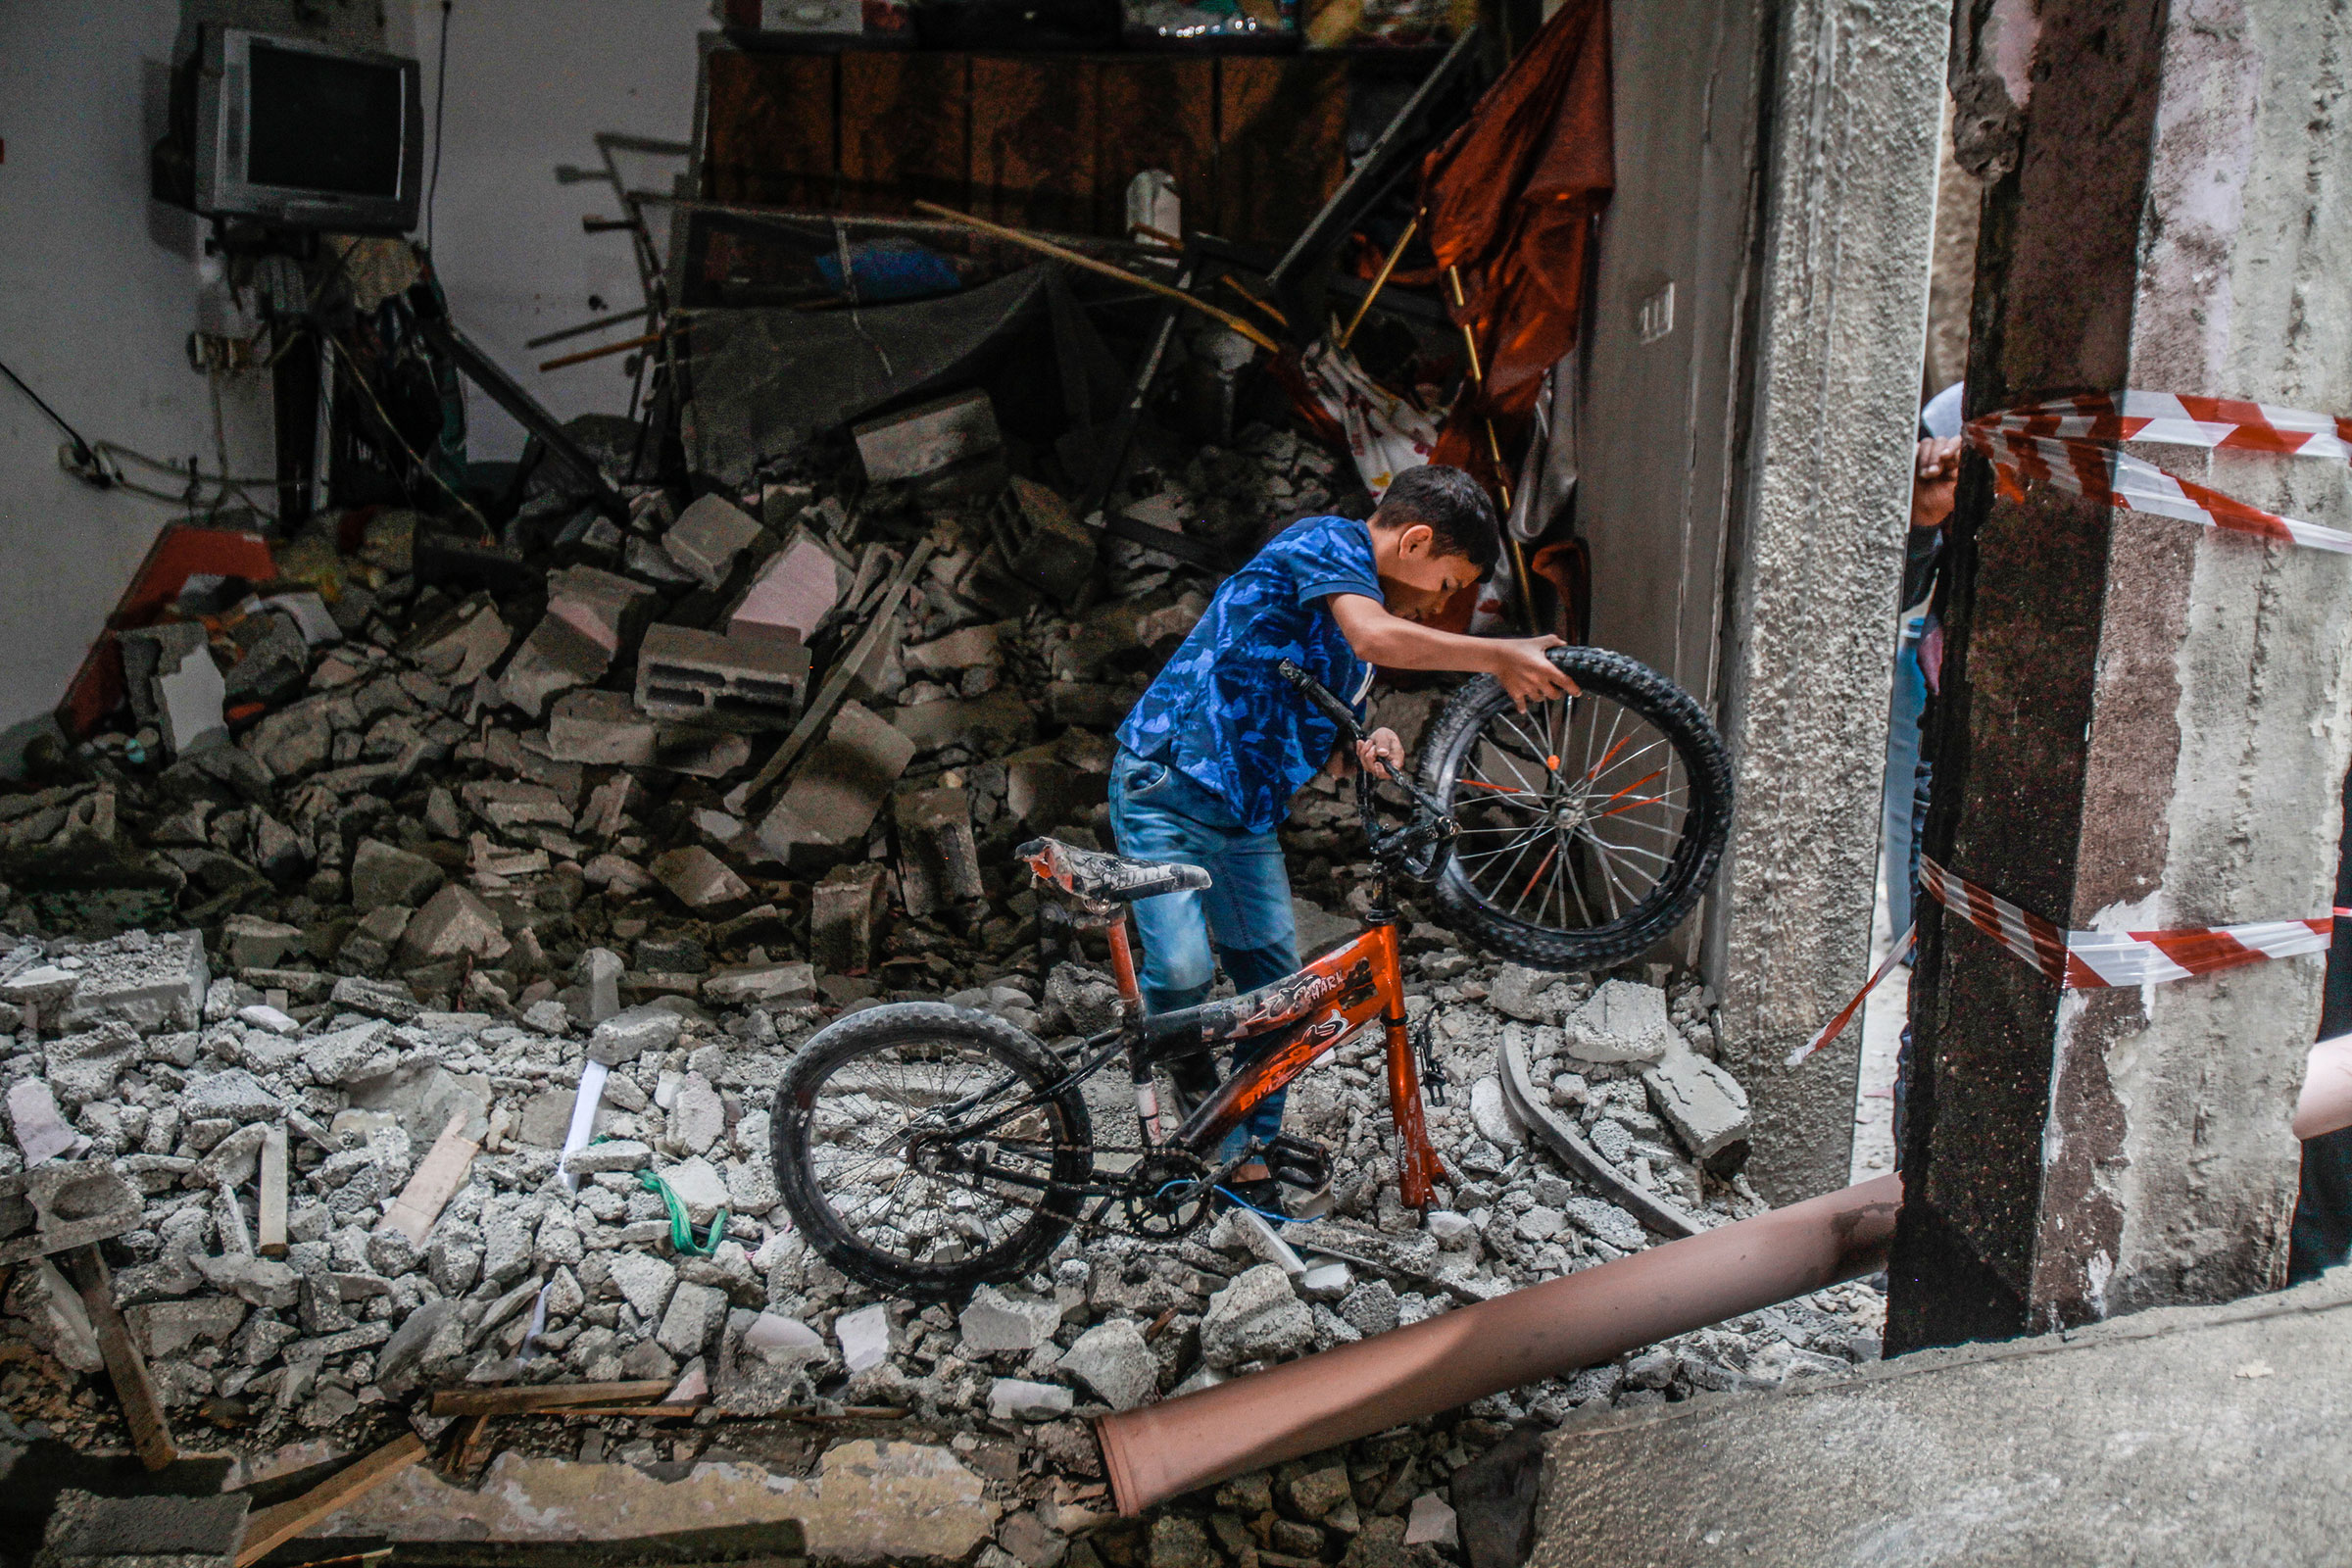 A child pulls his destroyed bike out of rubble that was once an apartment